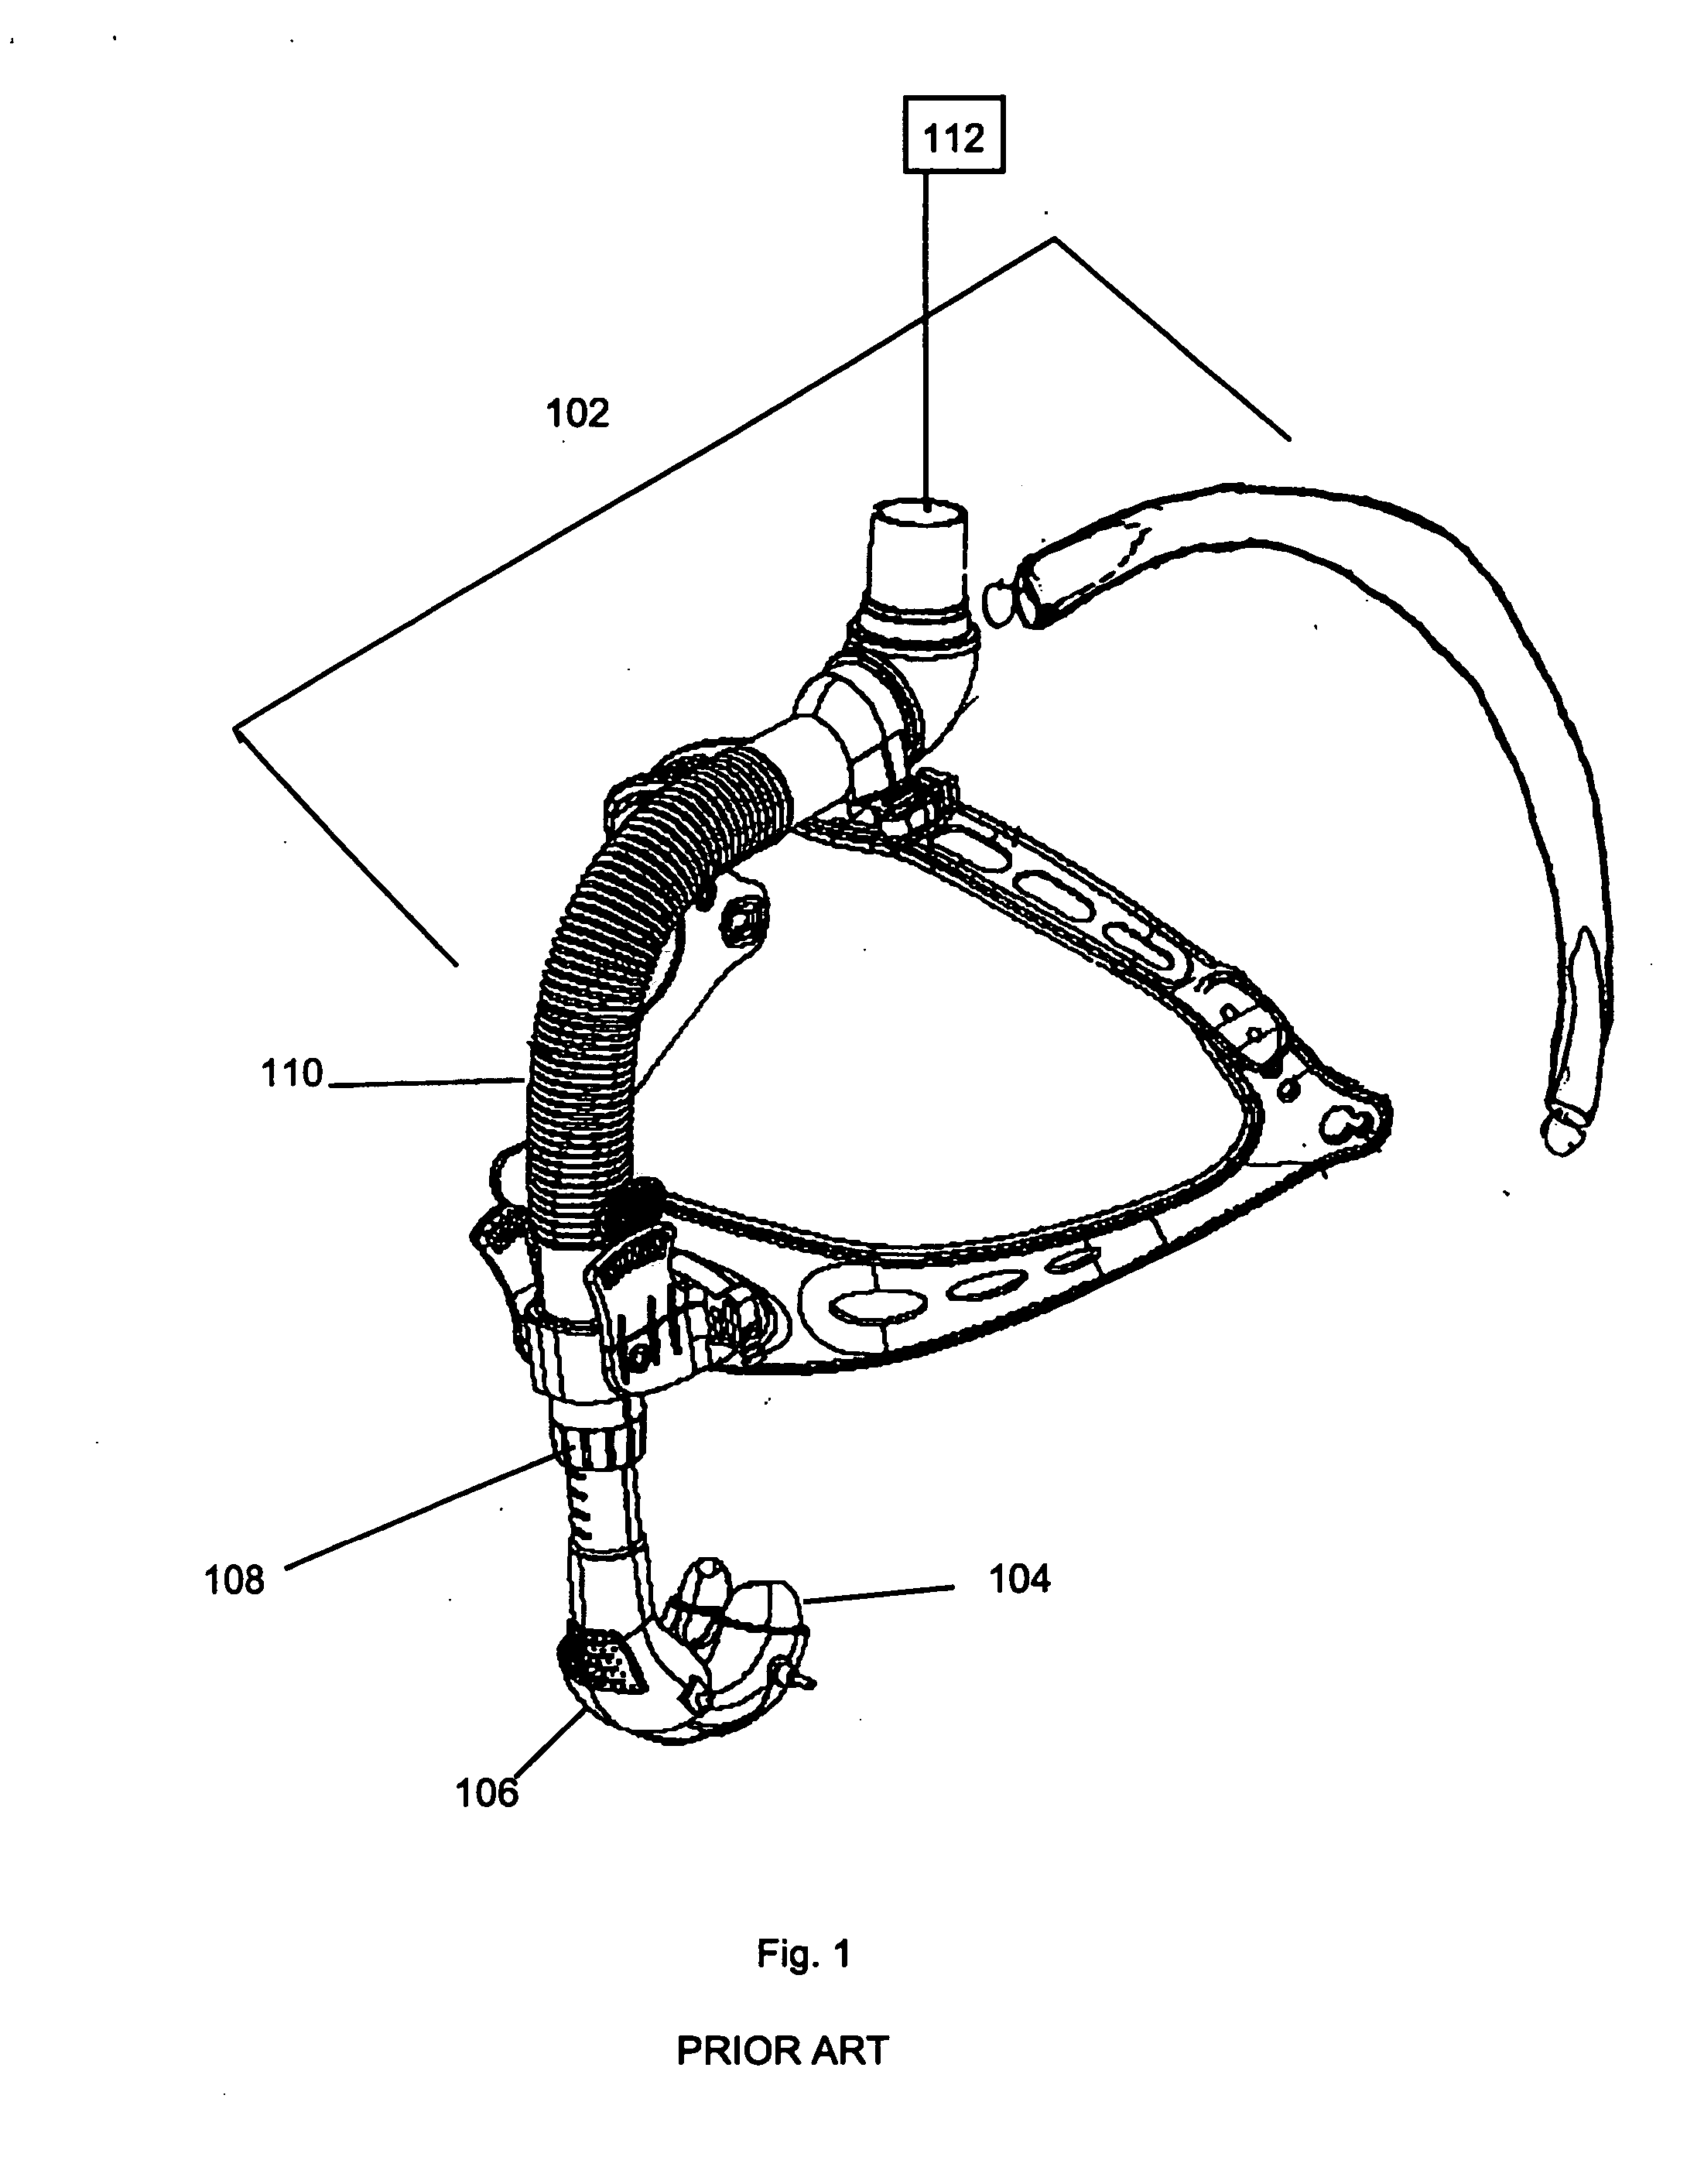 Patient interface with an integral cushion and nasal pillows